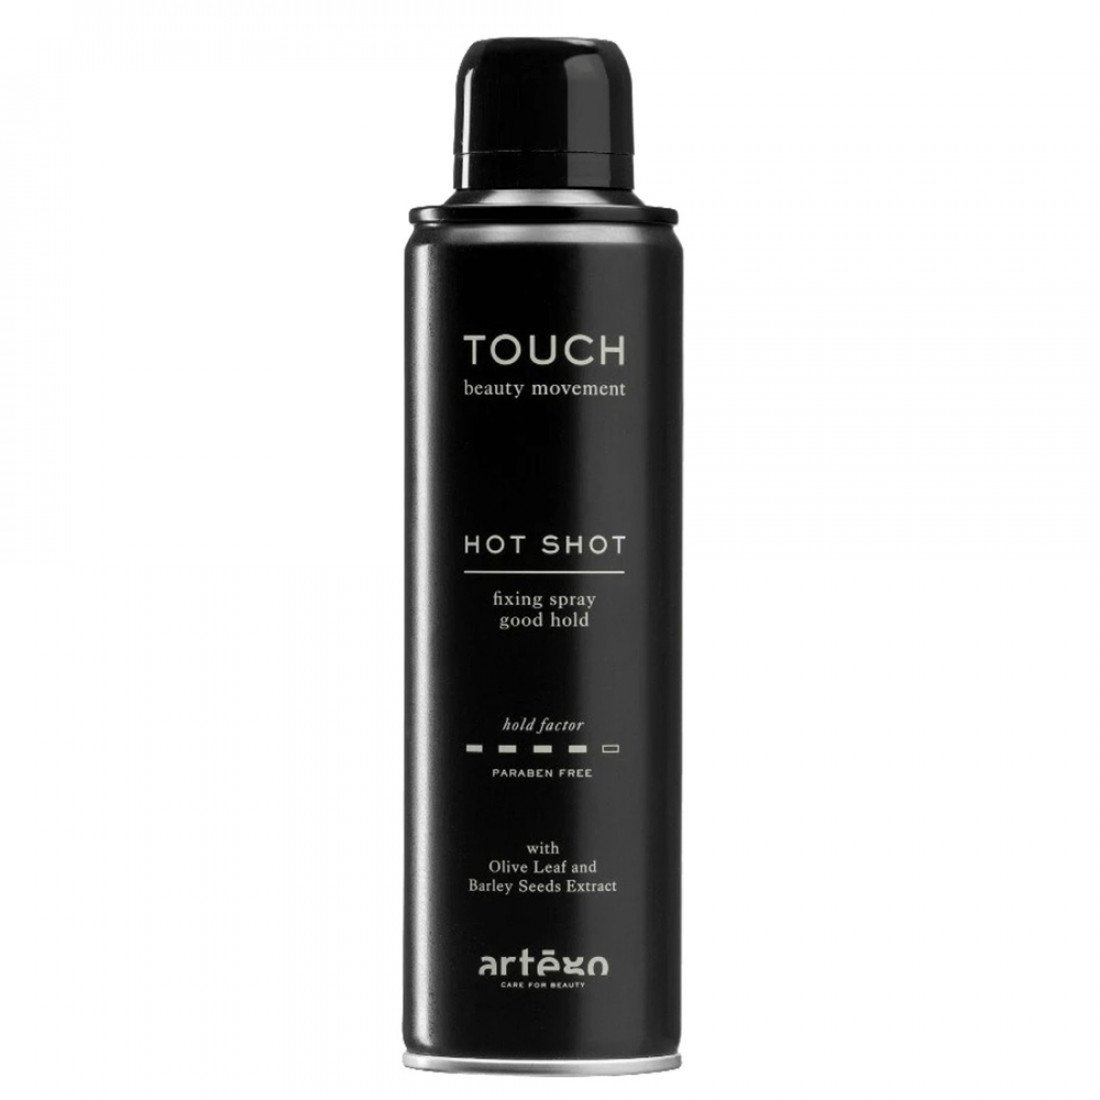 artego_touch_hot_shot_good_hold_fixing_spray_500ml